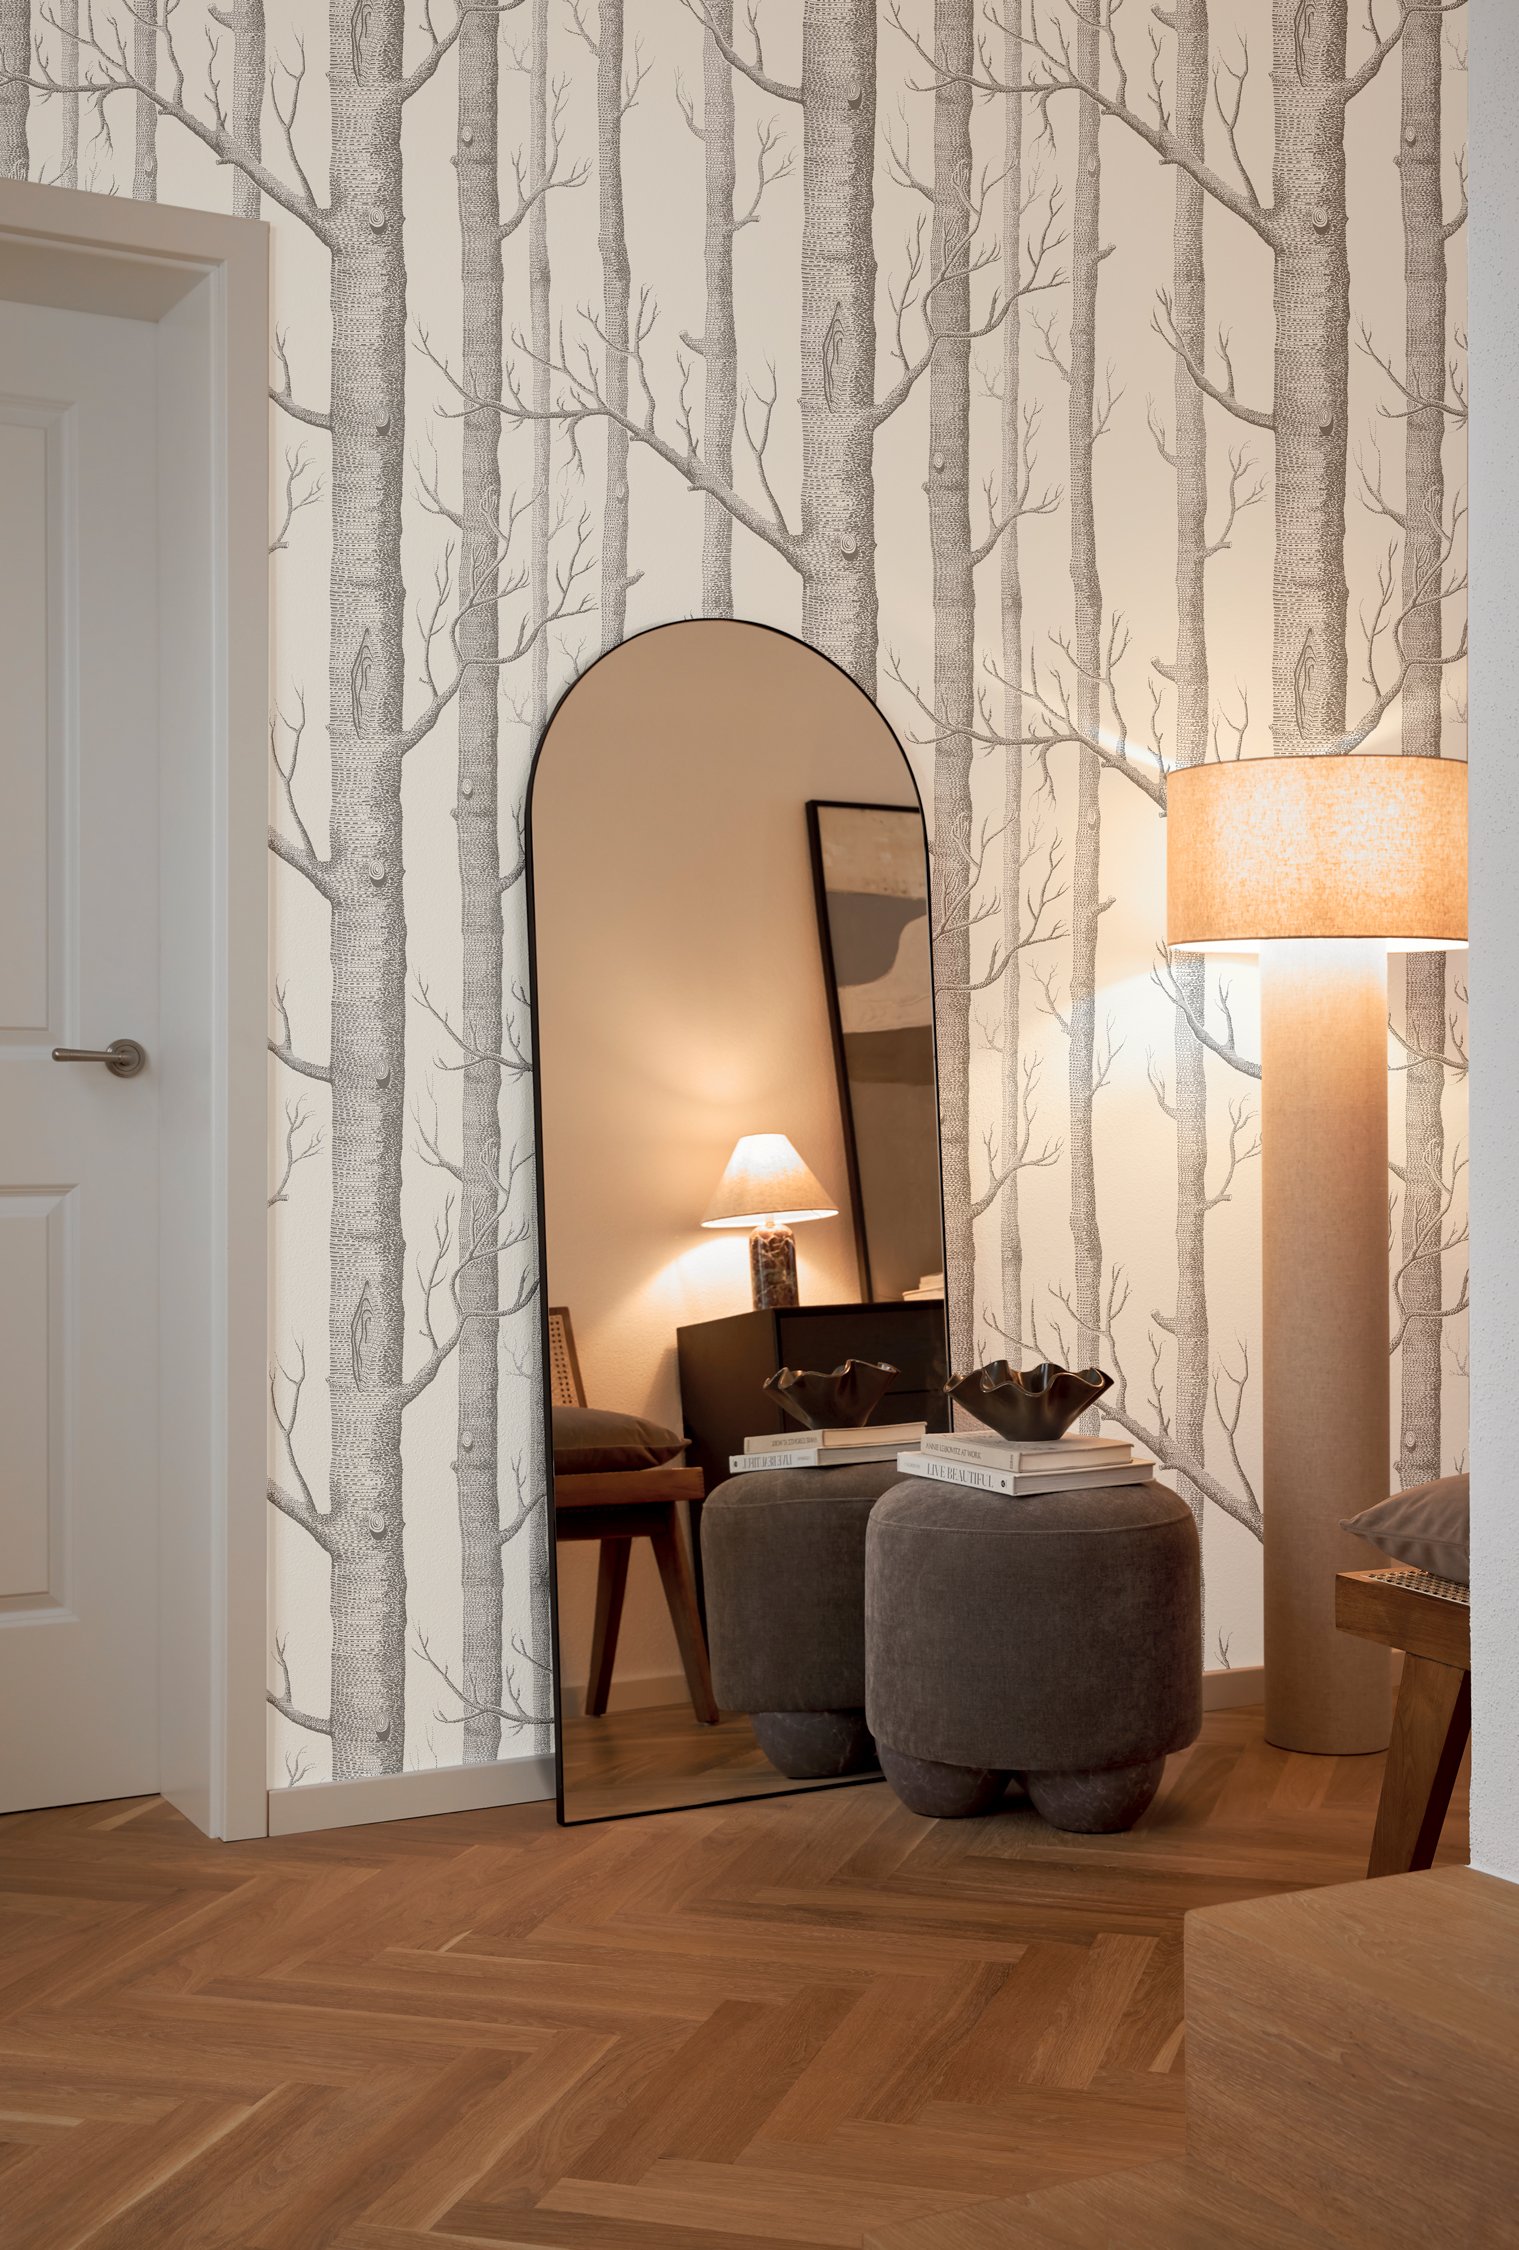 Hallway from Westwing with Woods wallpaper from Cole & Son